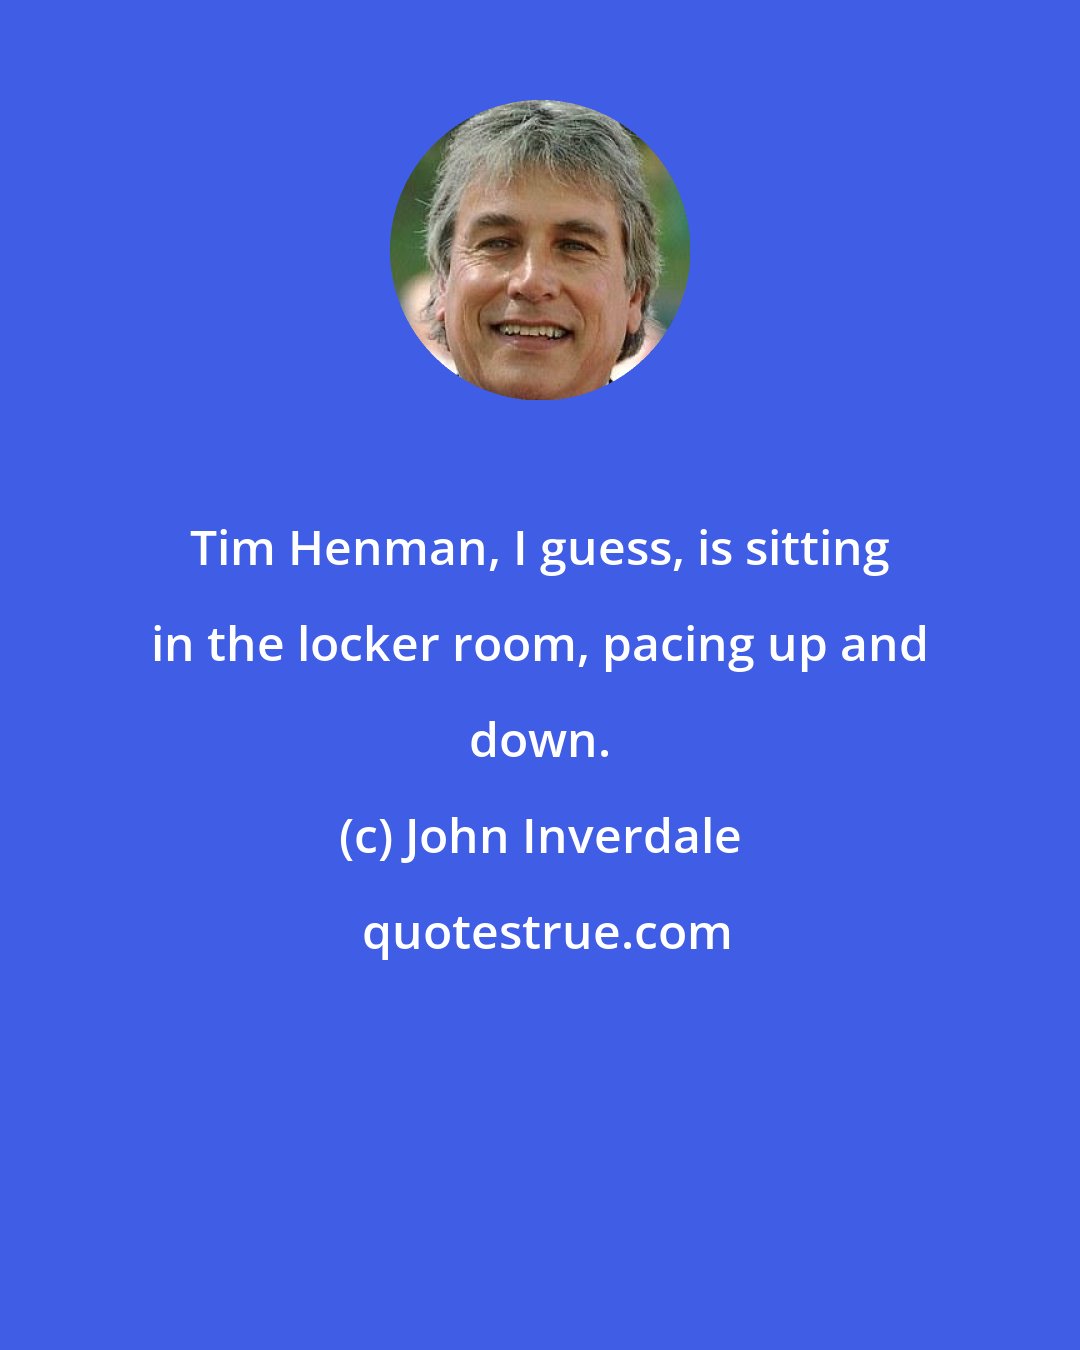 John Inverdale: Tim Henman, I guess, is sitting in the locker room, pacing up and down.